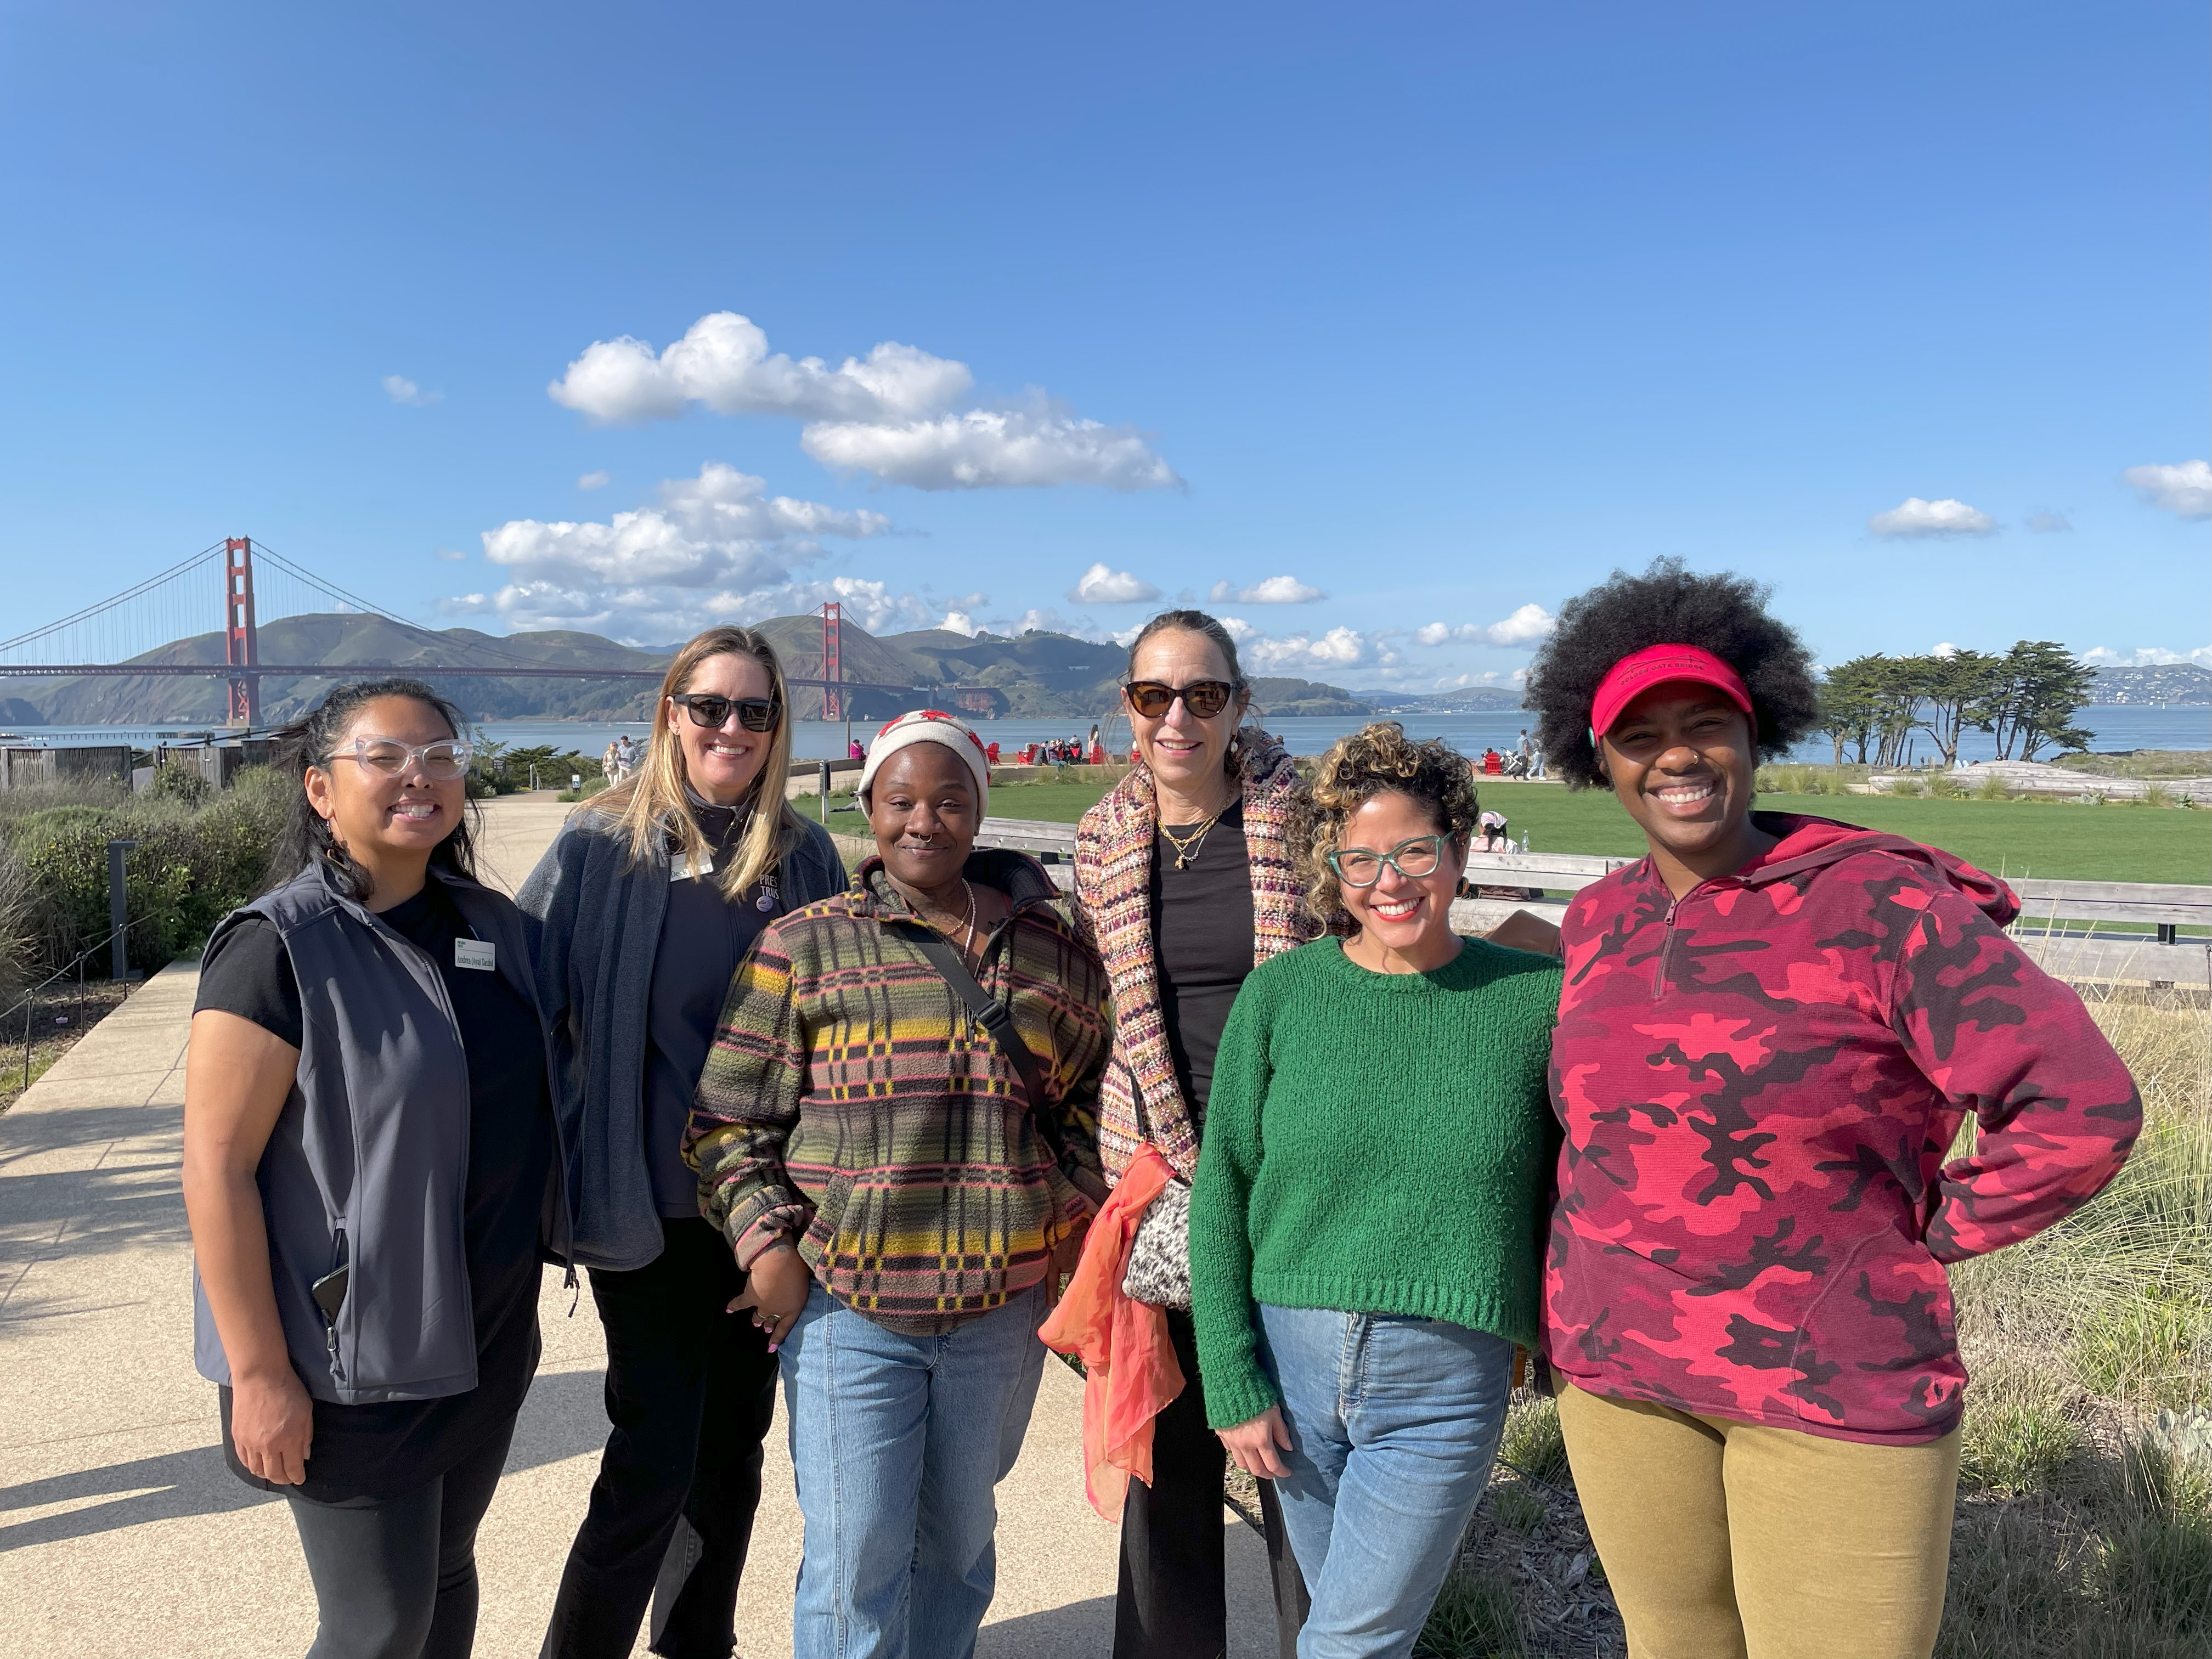 A group of women, Tosha with Favianna and representatives from the Presidio’s Community Partnership team, standing and smiling on the Presidio Tunnel Tops with the Golden Gate Bridge in the background.